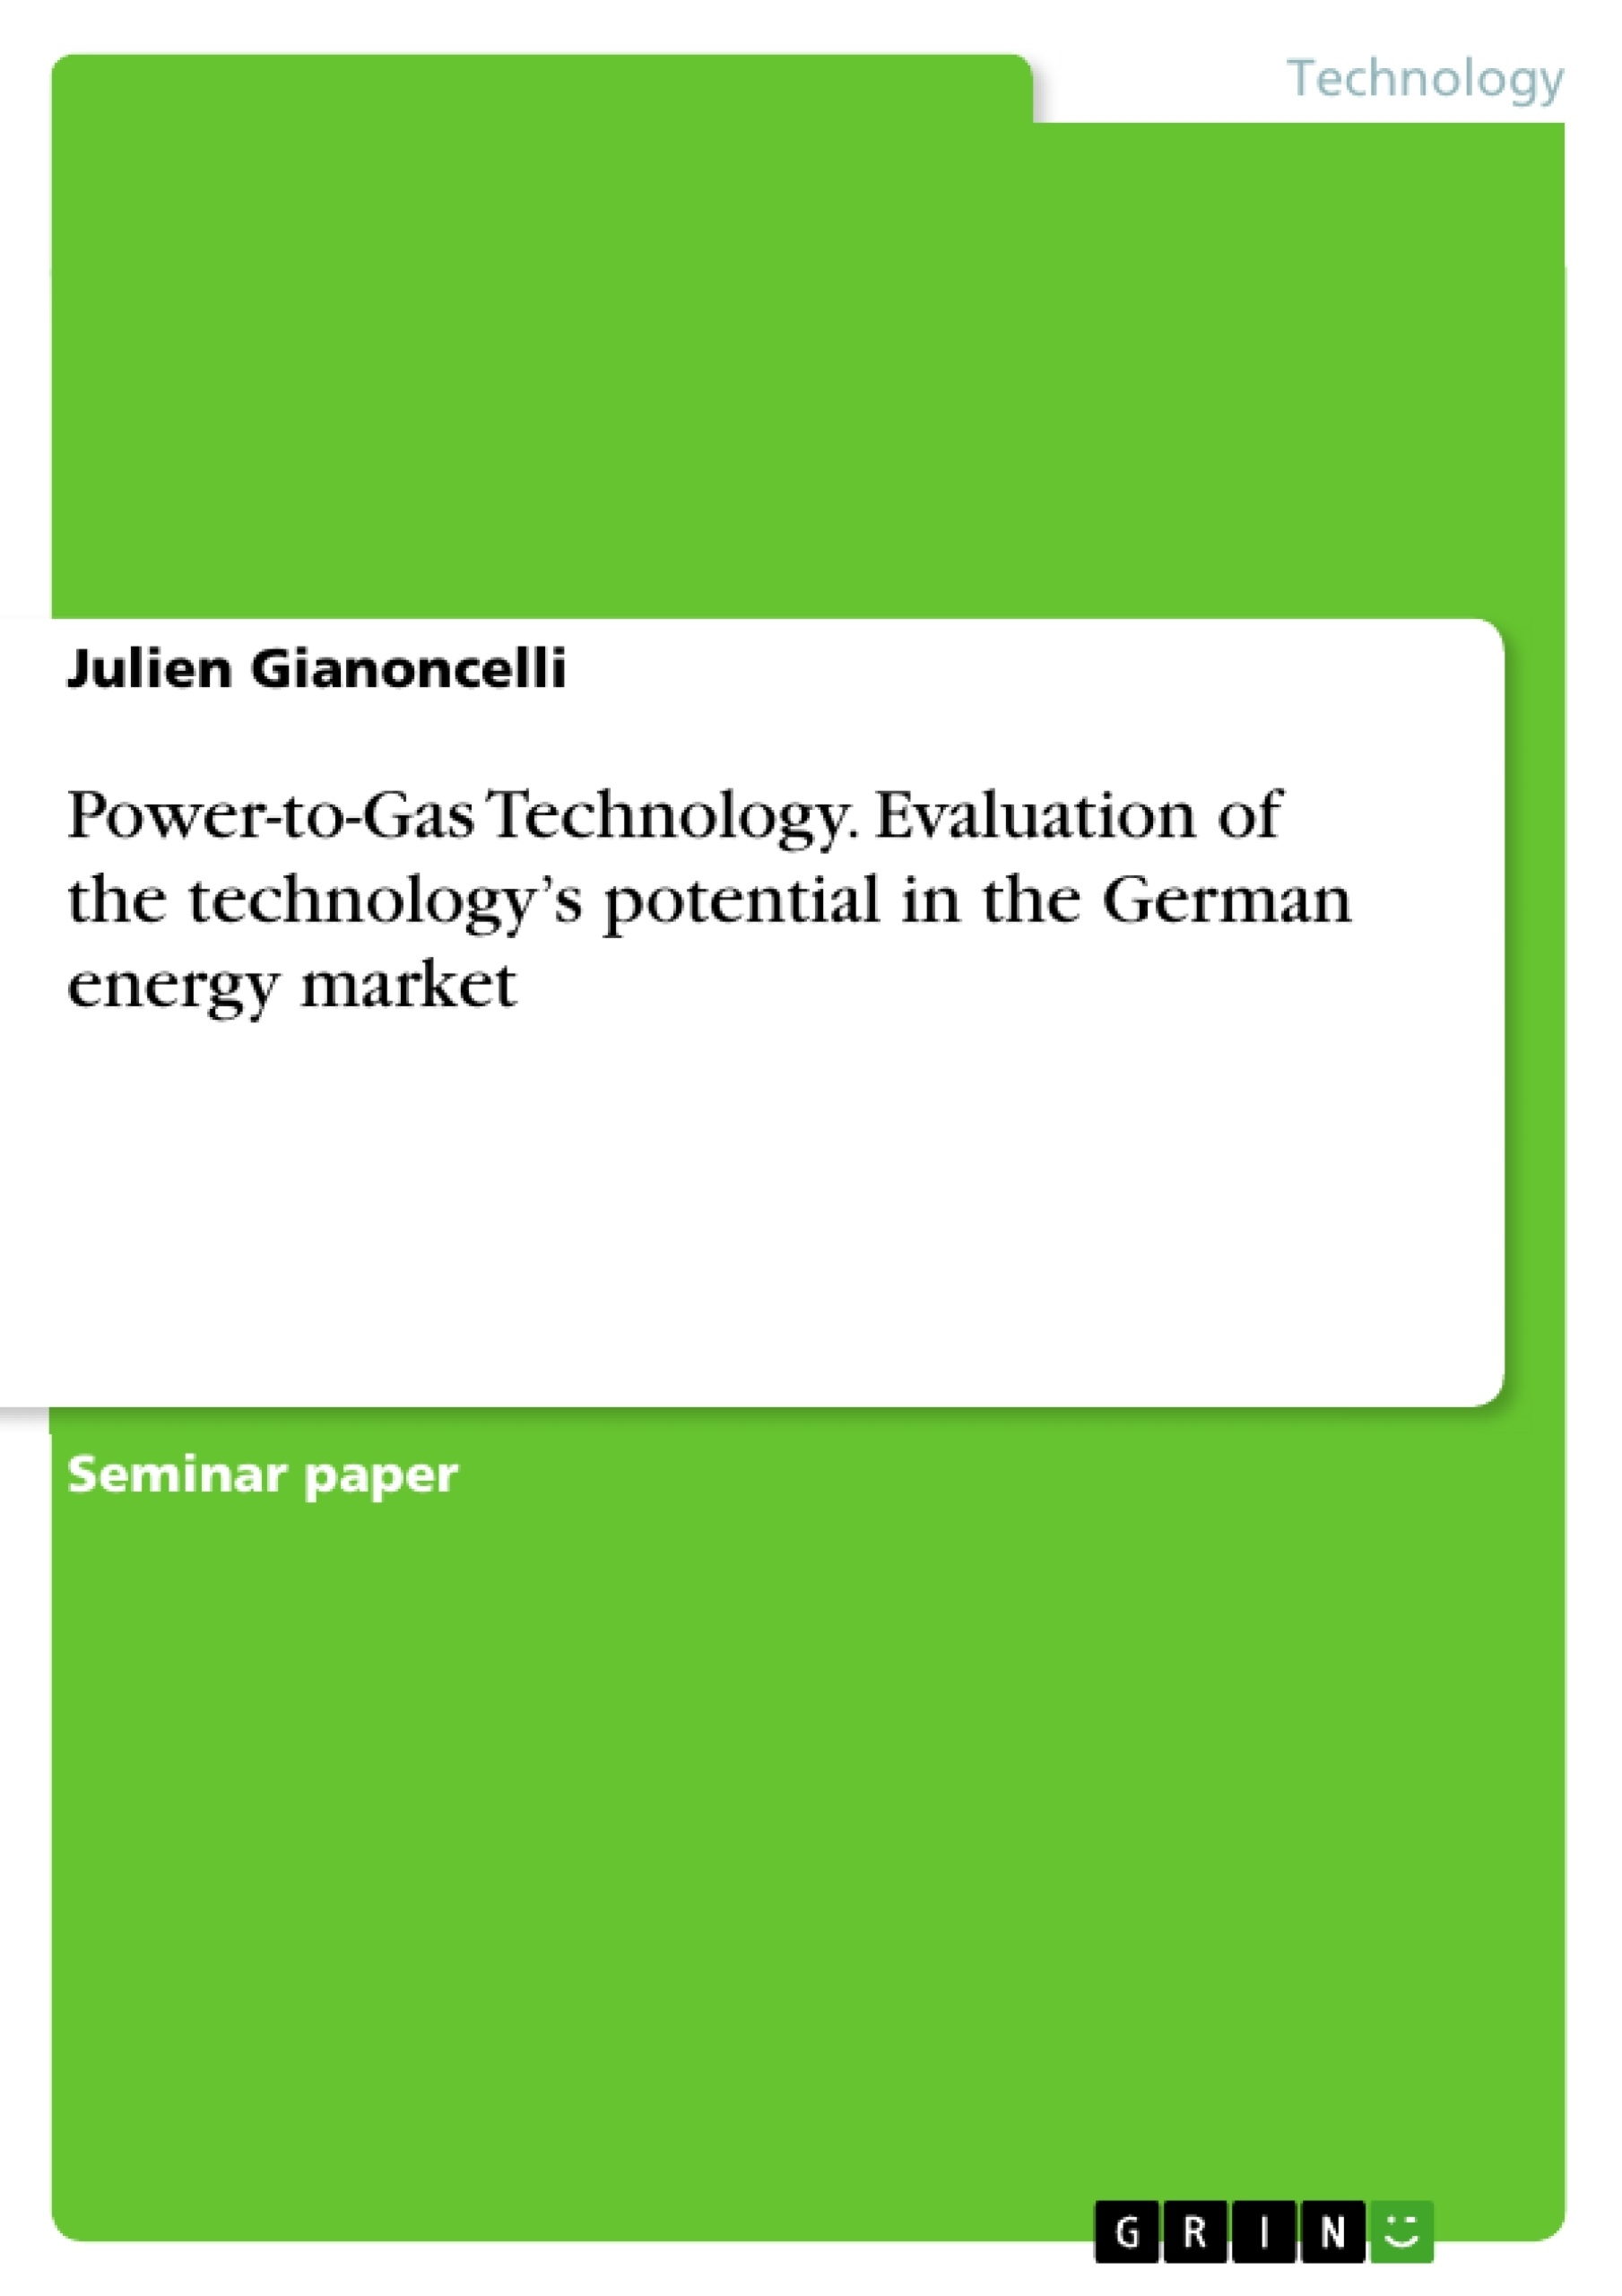 Title: Power-to-Gas Technology. Evaluation of the technology’s potential in the German energy market